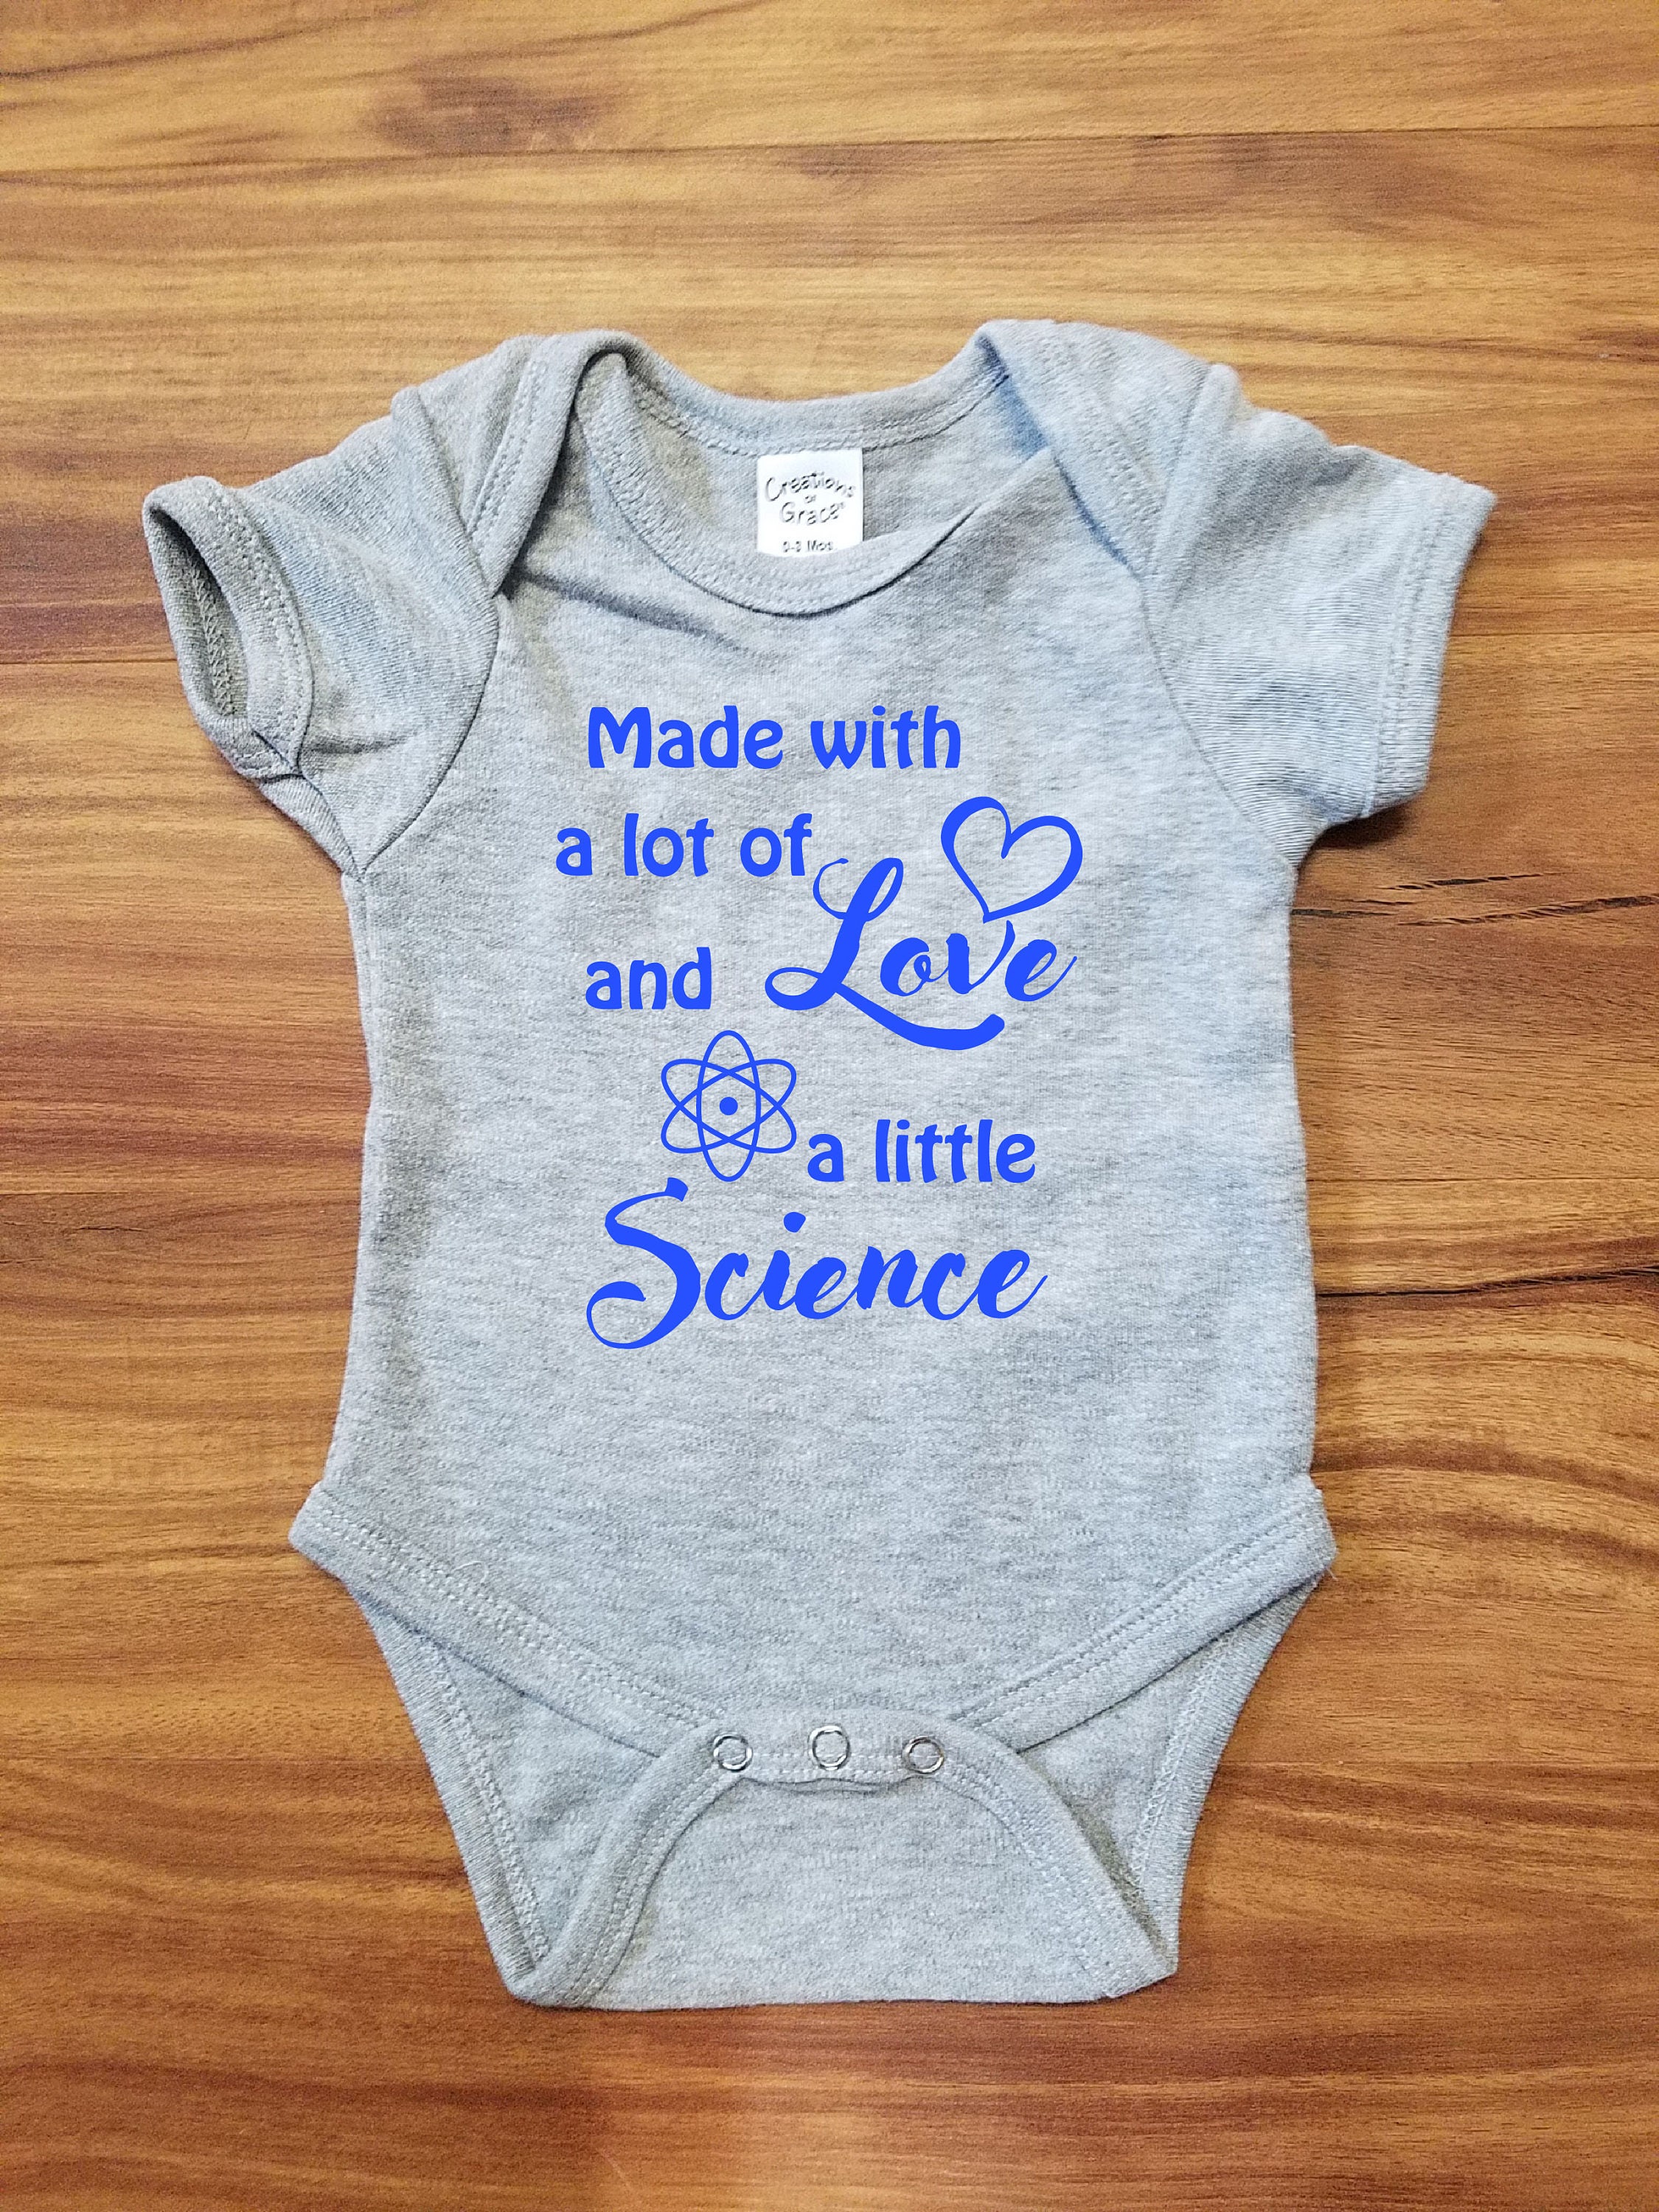 IVF Baby Gift, IVF Baby Announcement, IVF Baby Clothes